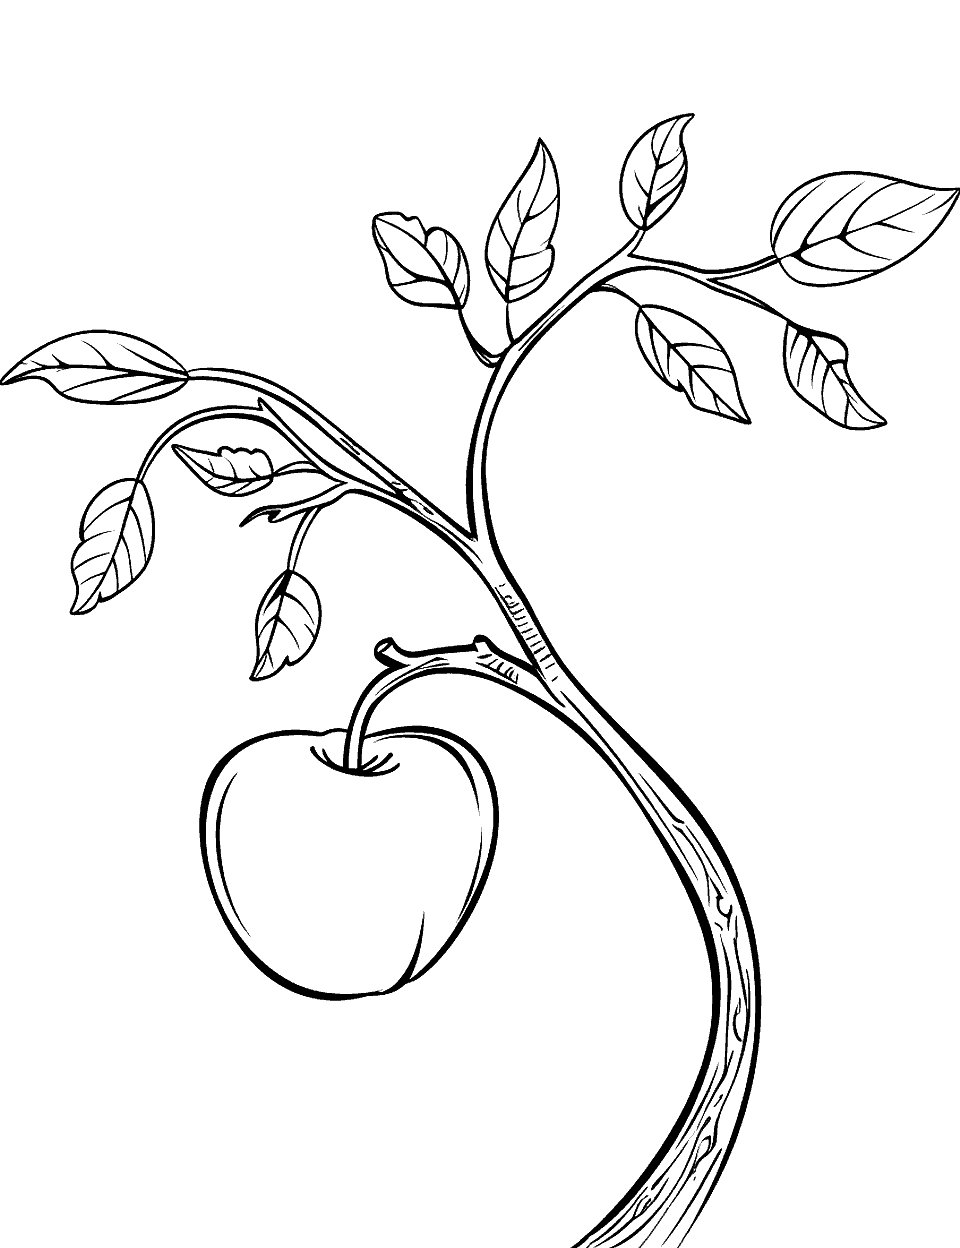 Apple on a Branch Coloring Page - A single apple hanging from a tree branch, surrounded by leaves.